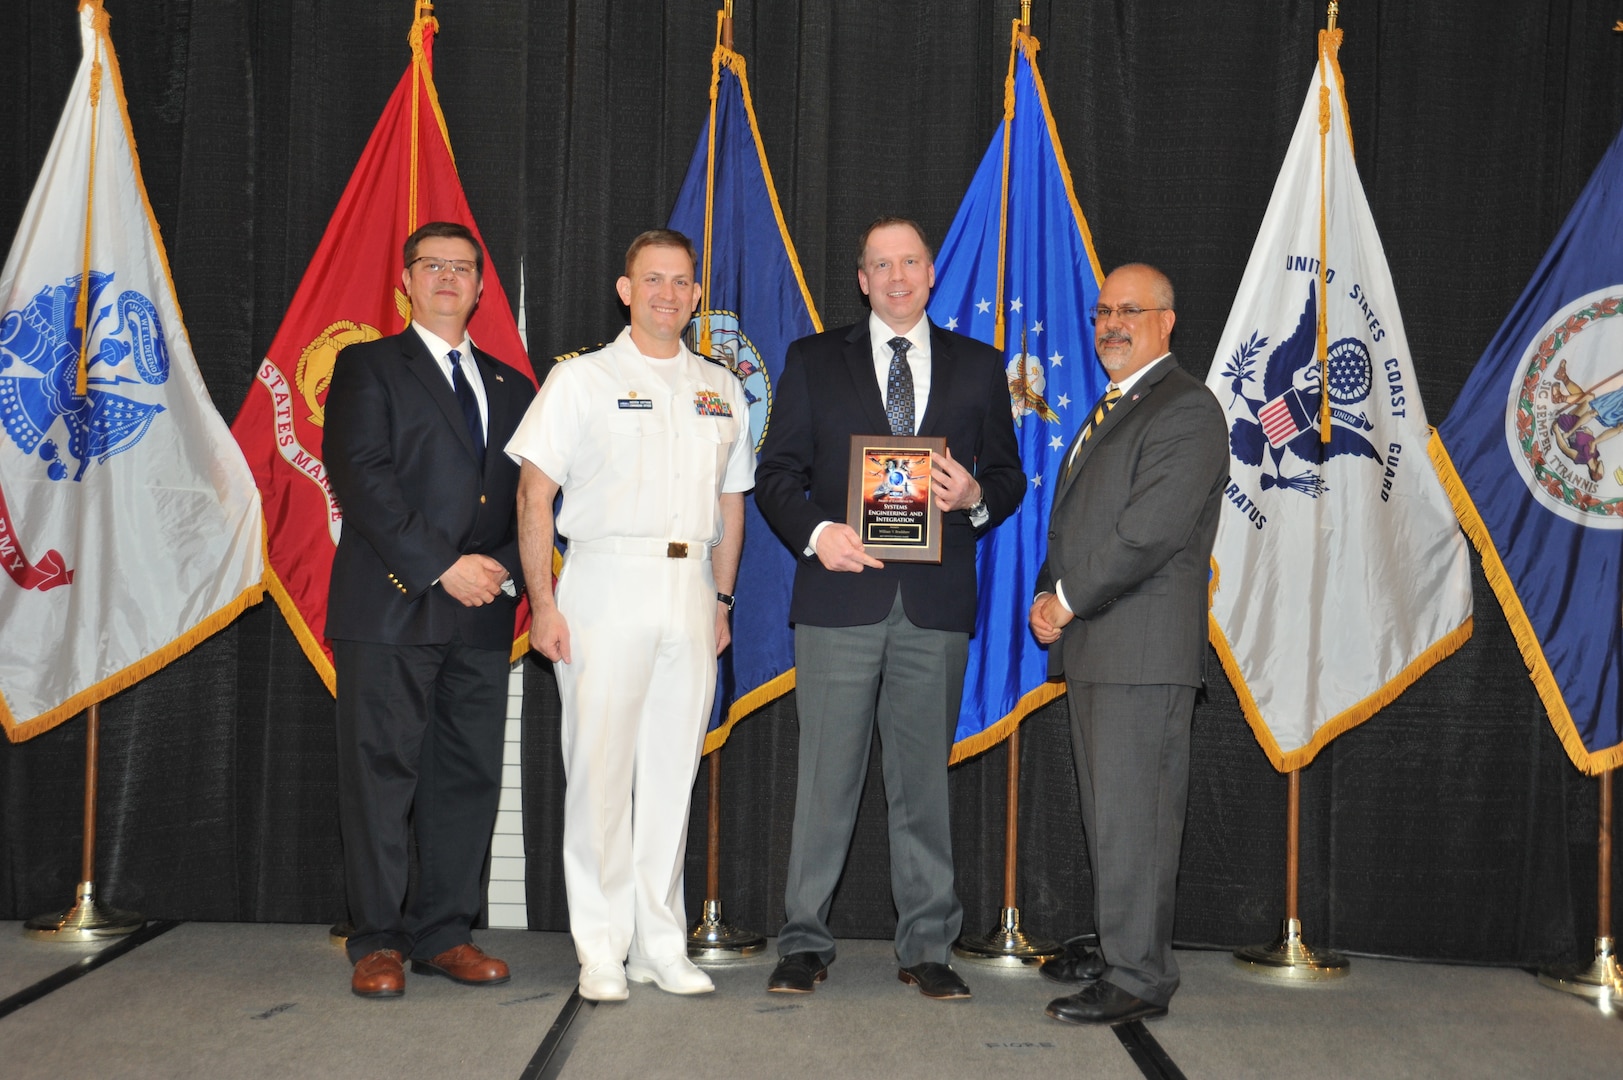 IMAGE: William Bradshaw is presented the Award of Excellence for Systems Engineering and Integration at Naval Surface Warfare Center Dahlgren Division's annual awards ceremony, Apr. 26 at the Fredericksburg Expo and Conference Center.

The Award of Excellence for Systems Engineering and Integration was established to recognize individuals who have made a notable and significant impact to NSWCDD through their outstanding performance in systems engineering and integration.